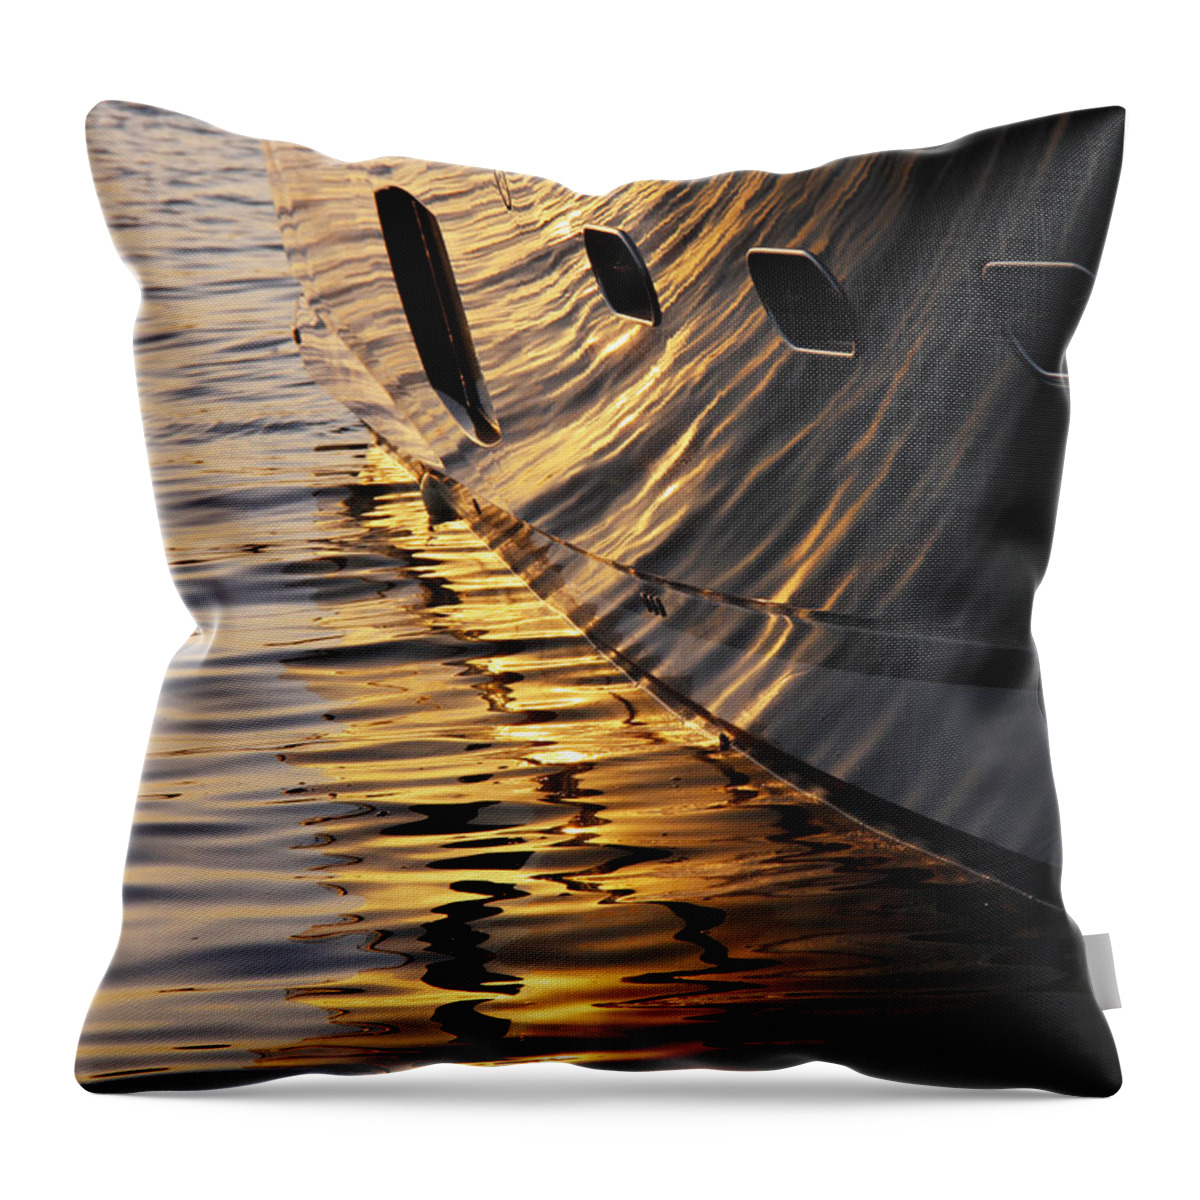 Nautical Throw Pillow featuring the photograph Sunset Reflections With Boat No 1 by Ben and Raisa Gertsberg